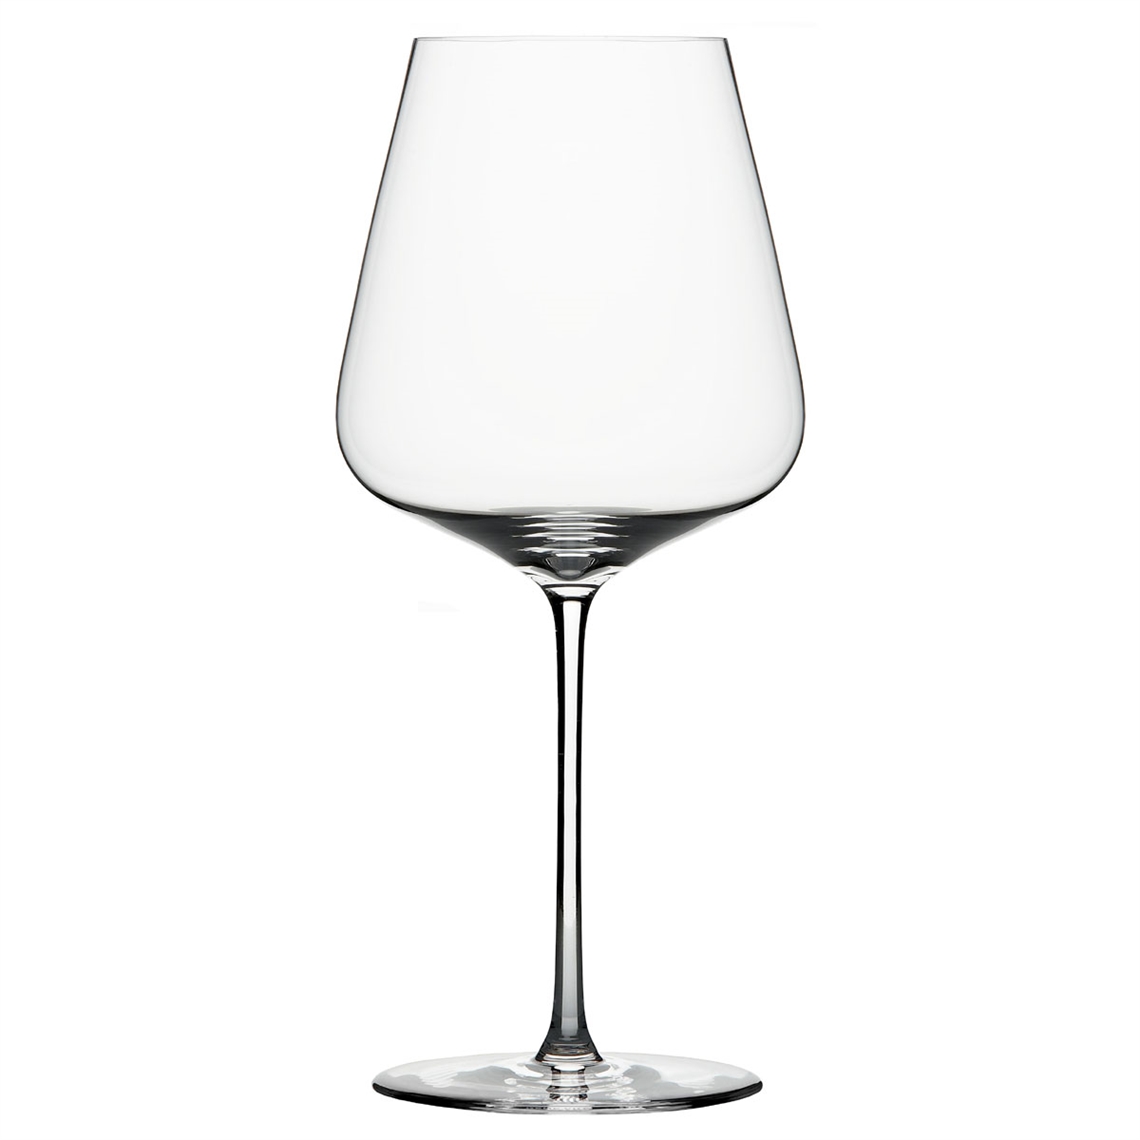 View more restaurant glasses - schott zwiesel from our Premium Mouth Blown Glassware range